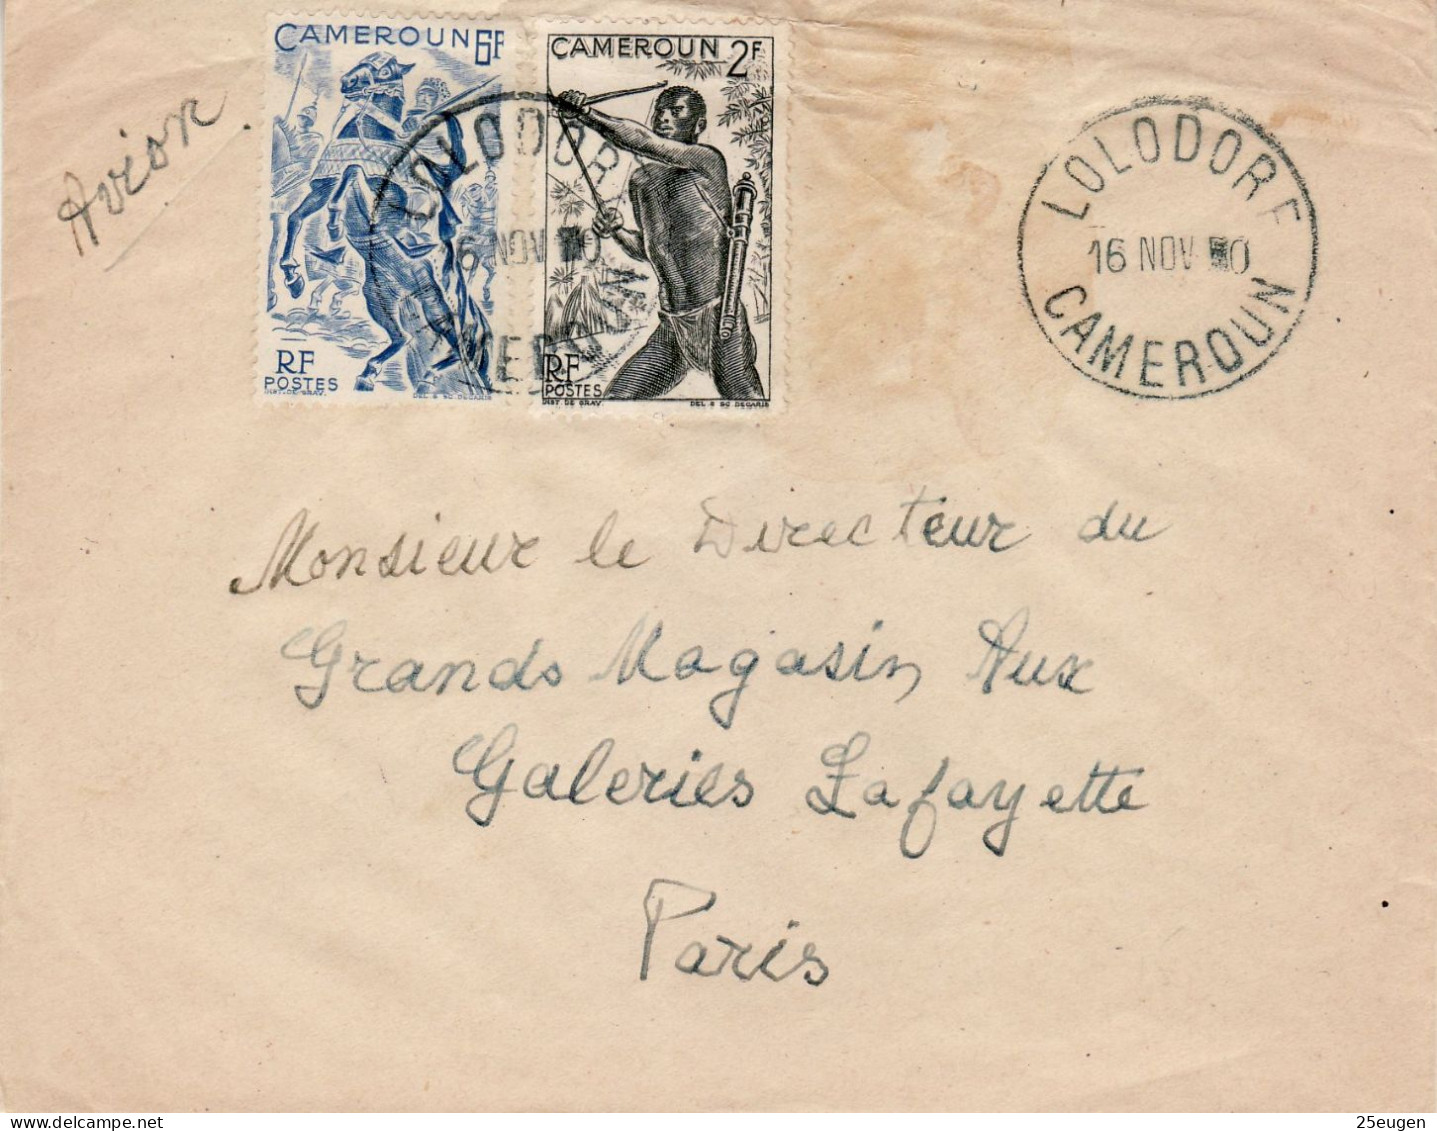 CAMEROUN 1950 AIRMAIL LETTER SENT FROM LOLODORE TO PARIS - Cartas & Documentos